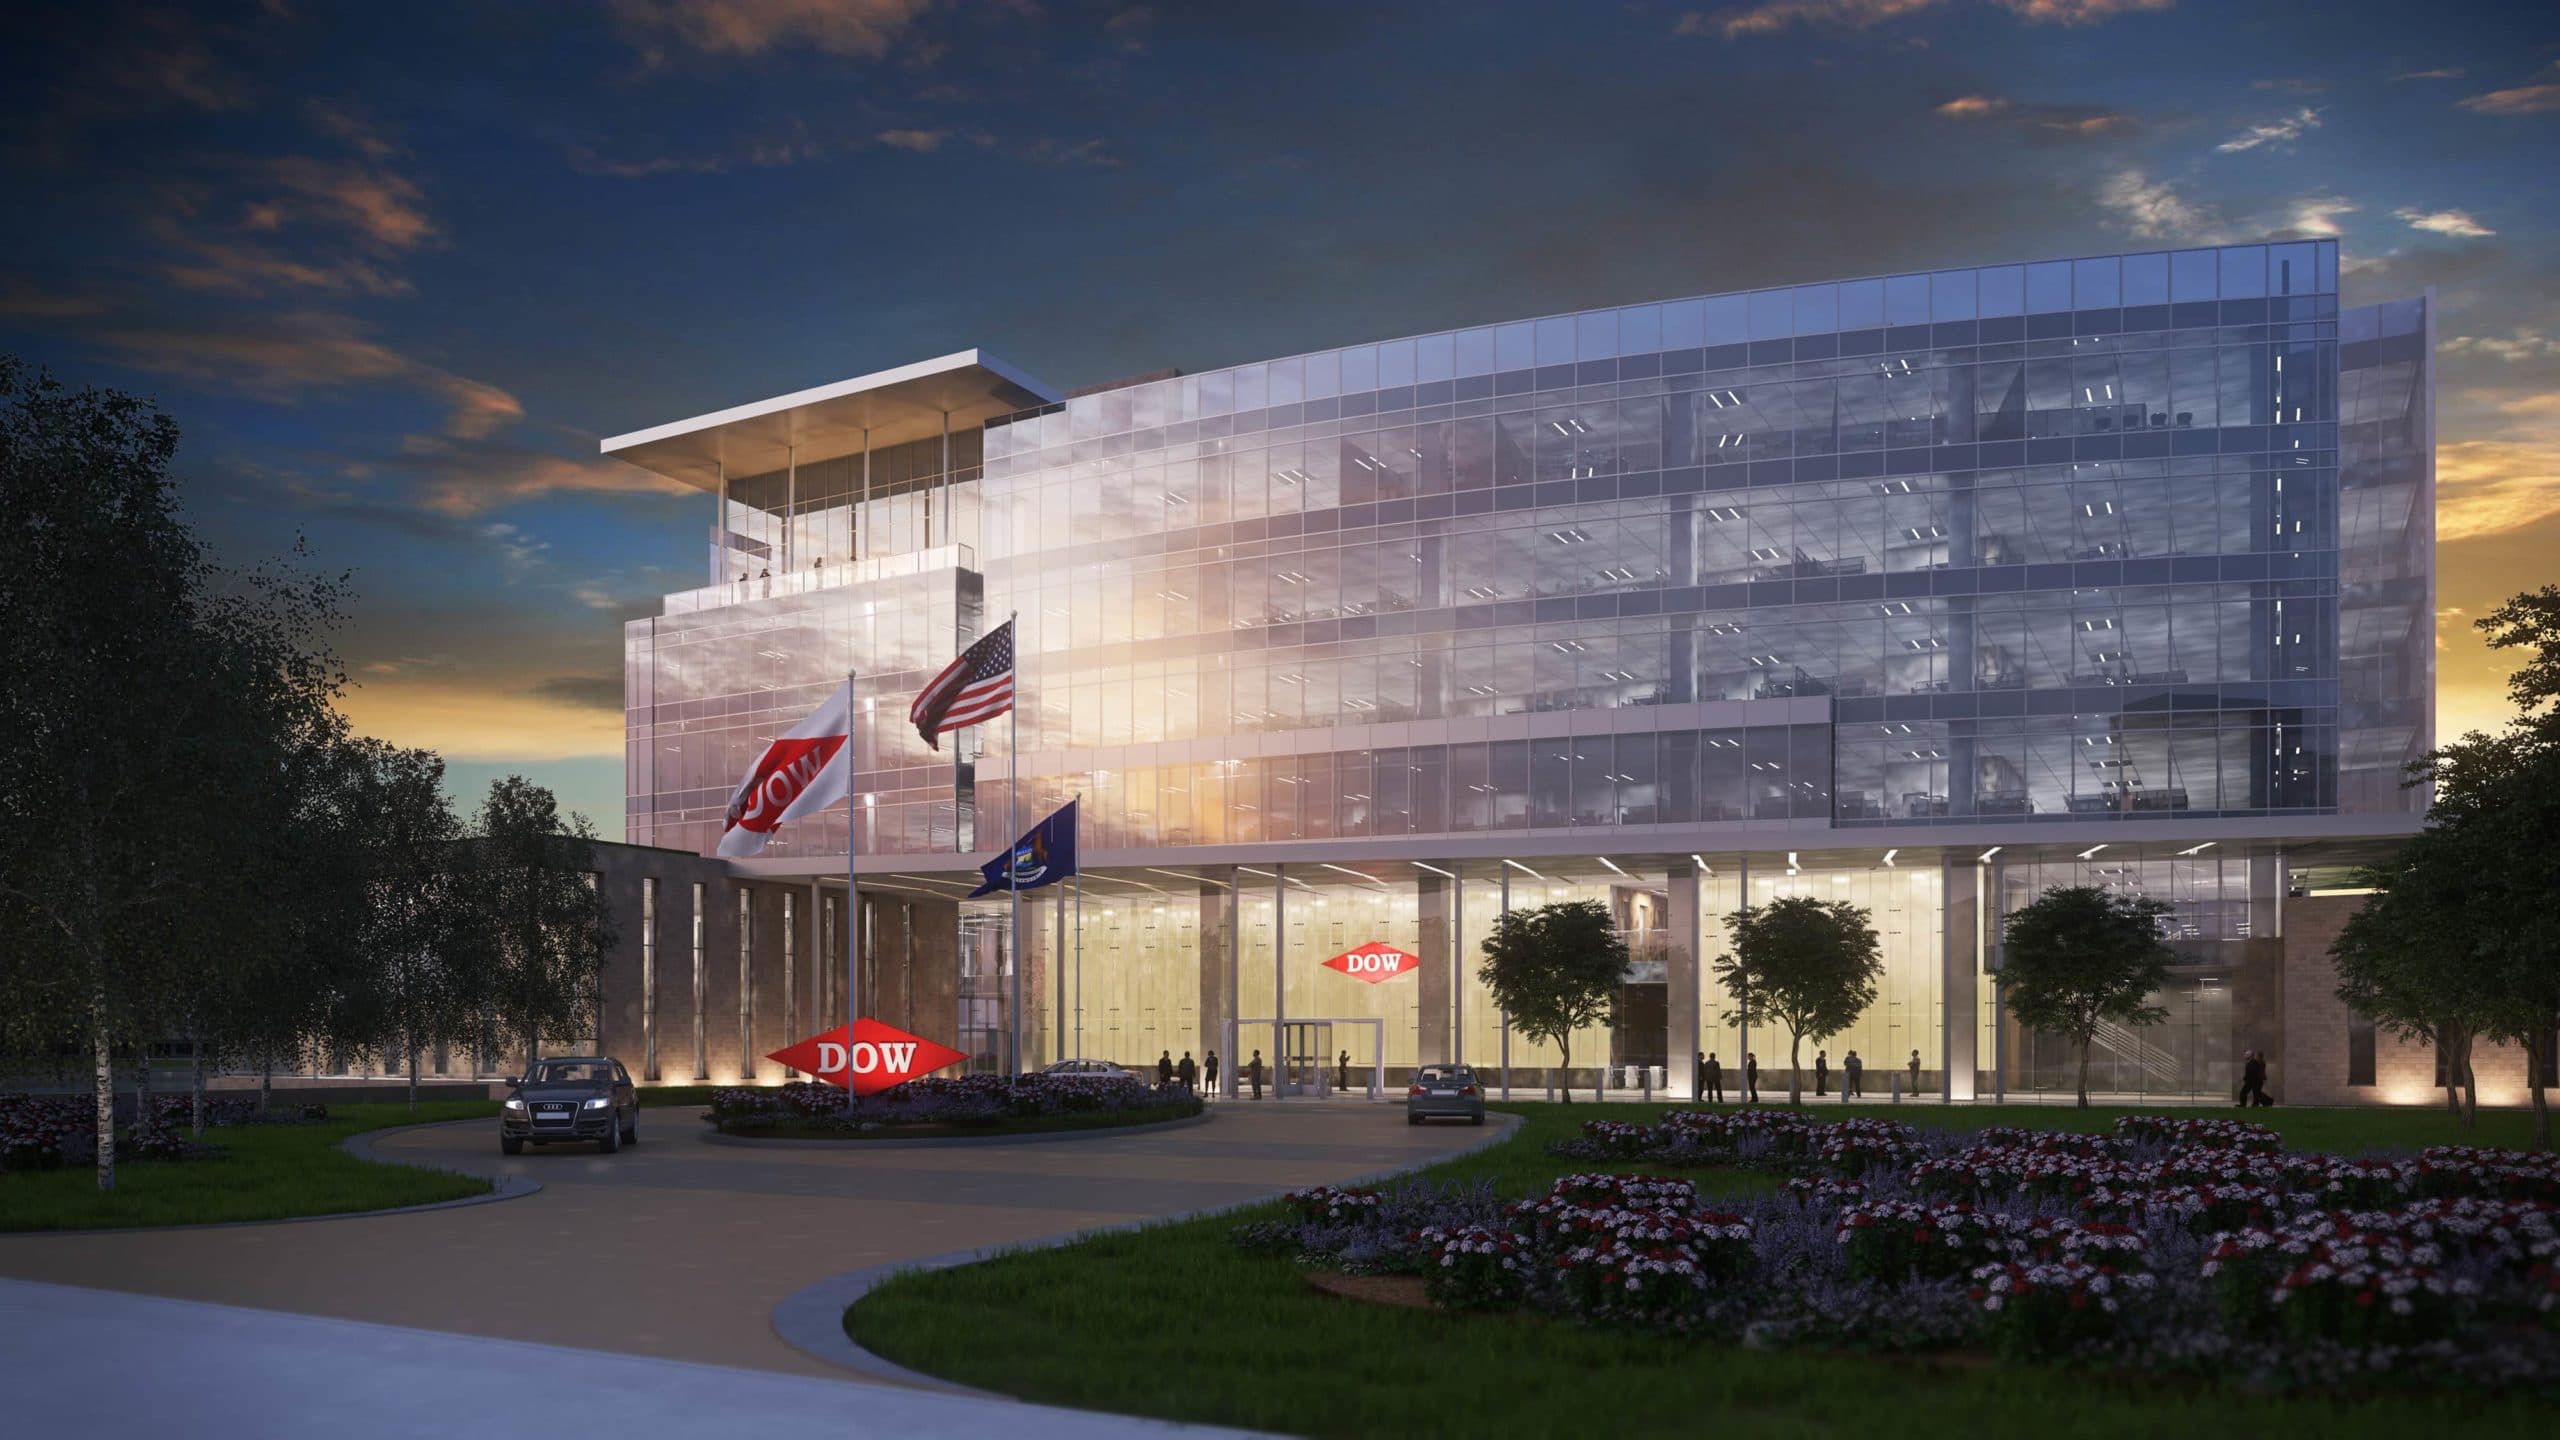 KIRCO Announces Grand Opening of the Global Dow Center, Headquarters of The Dow Chemical Company, and Construction of New H. H. Dow Visitors and Heritage Center